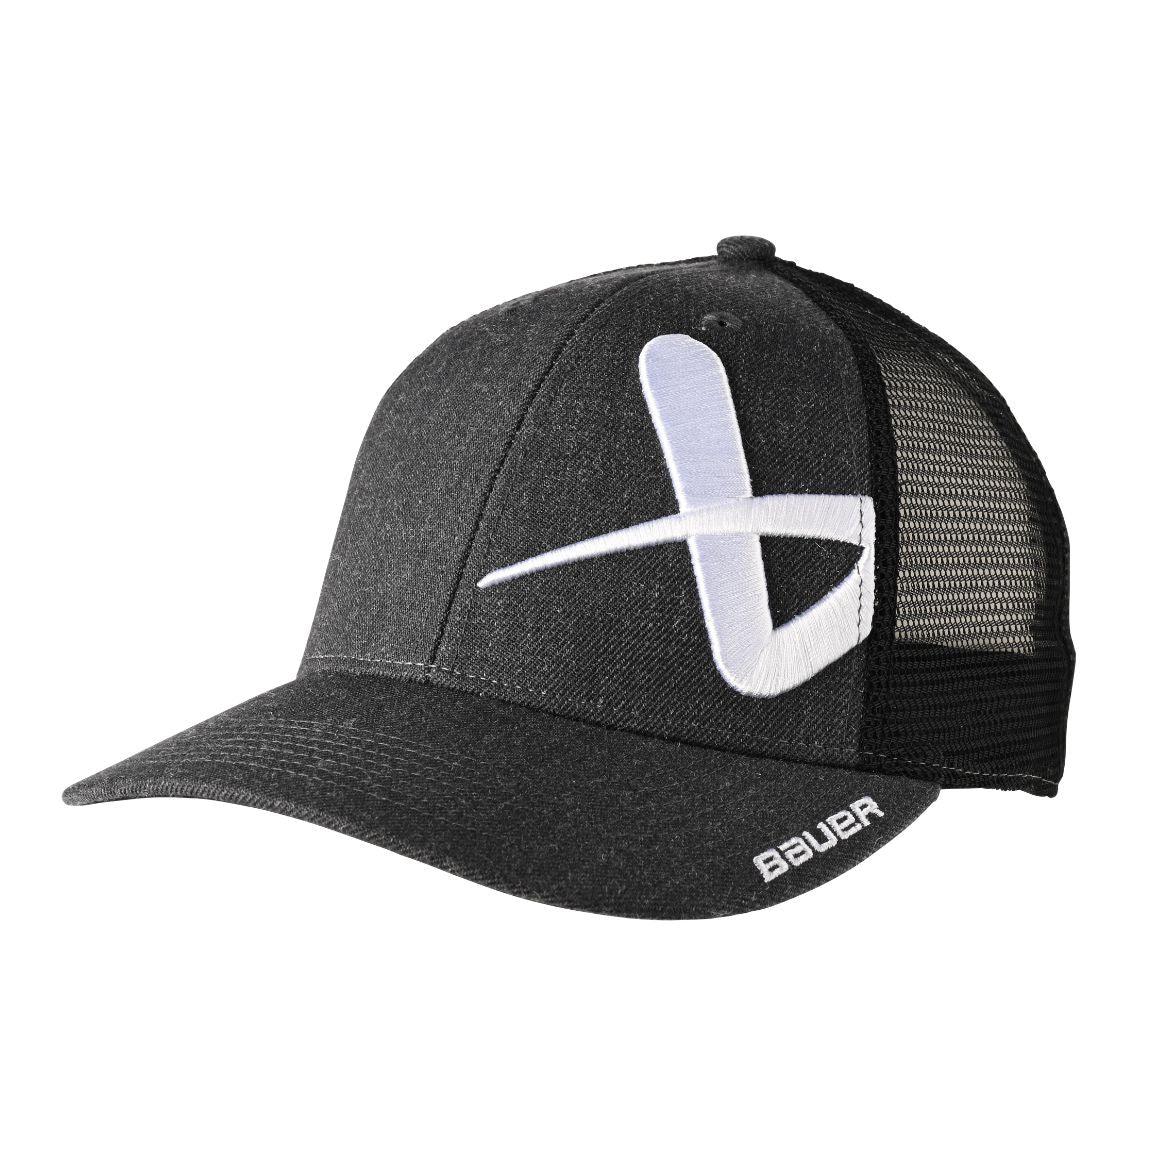 Bauer New Era 9FIFTY Core Hat - Sports Excellence